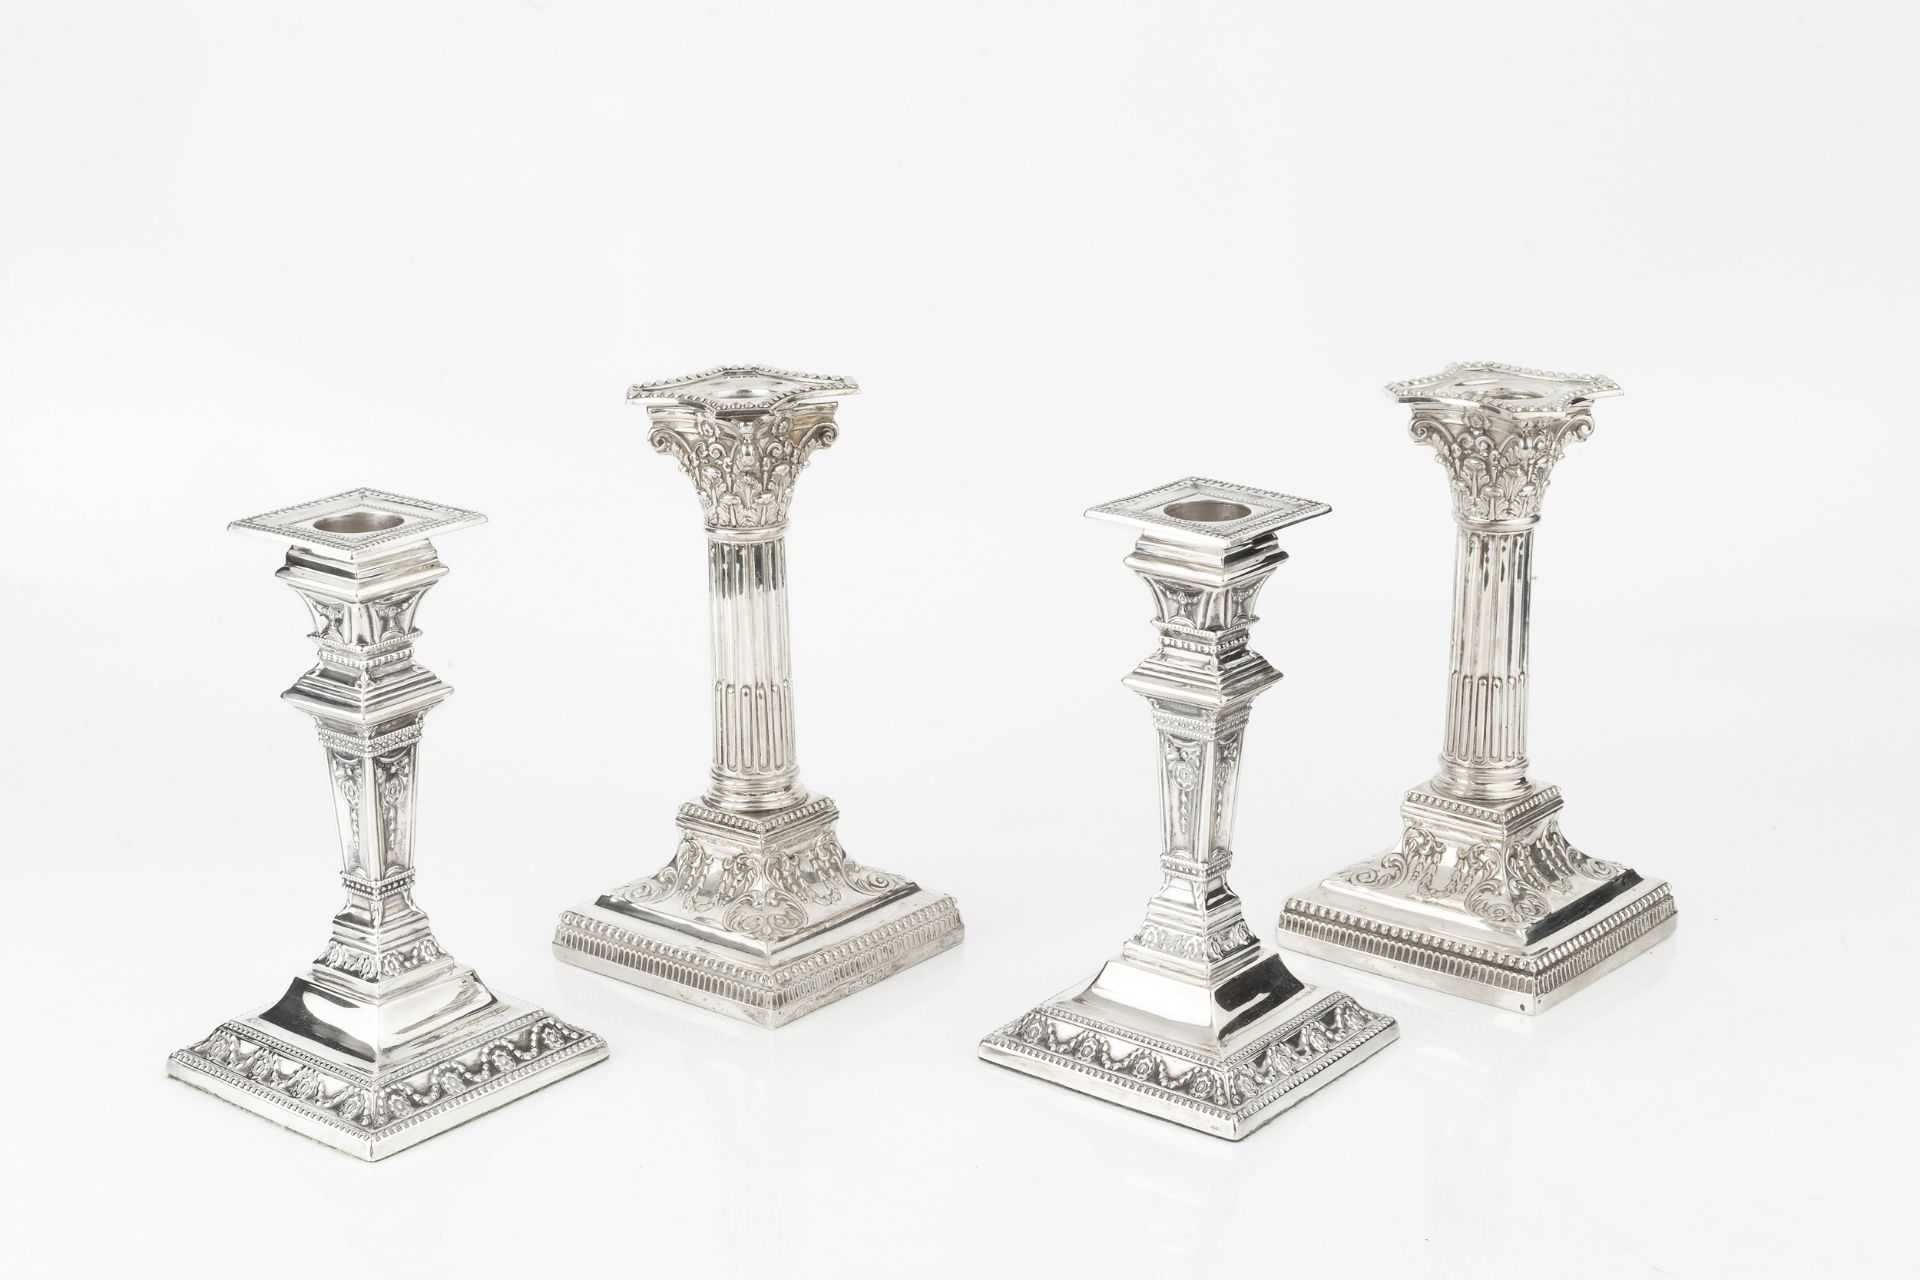 A pair of late Victorian silver candlesticks, of Corinthian form, with beaded drip trays and